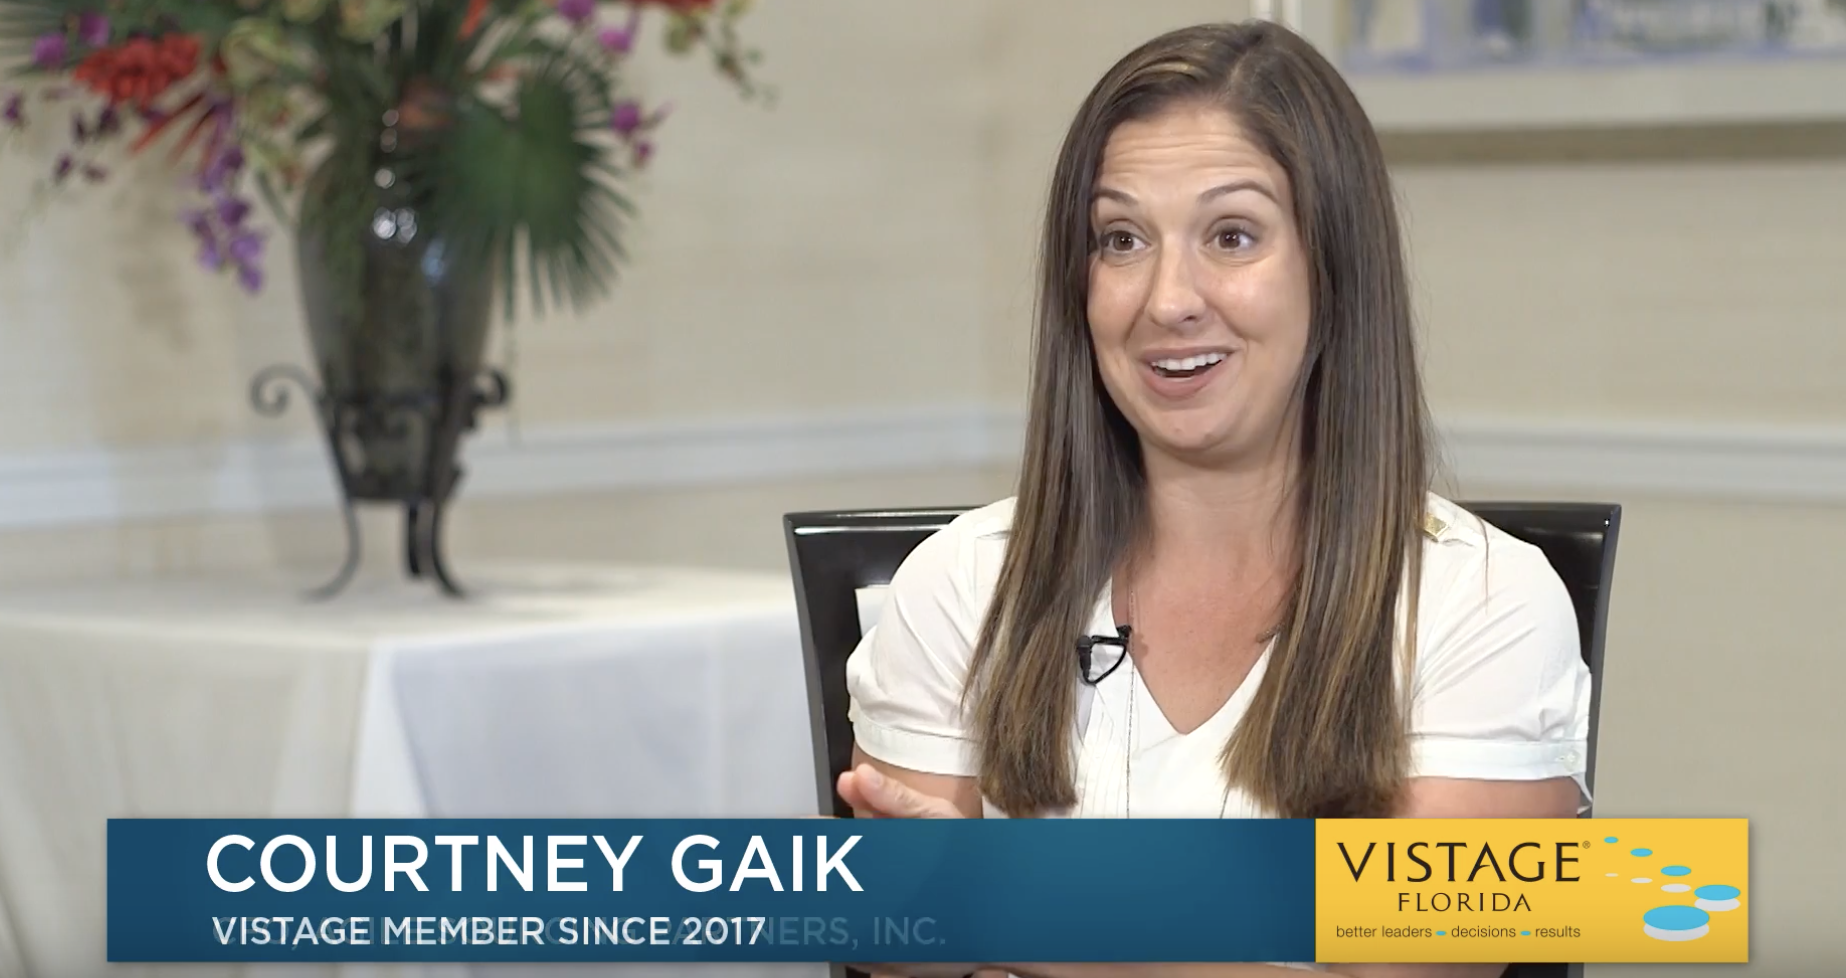 Courtney Gaik: Vistage Is A Powerful Addition To Your Professional Career